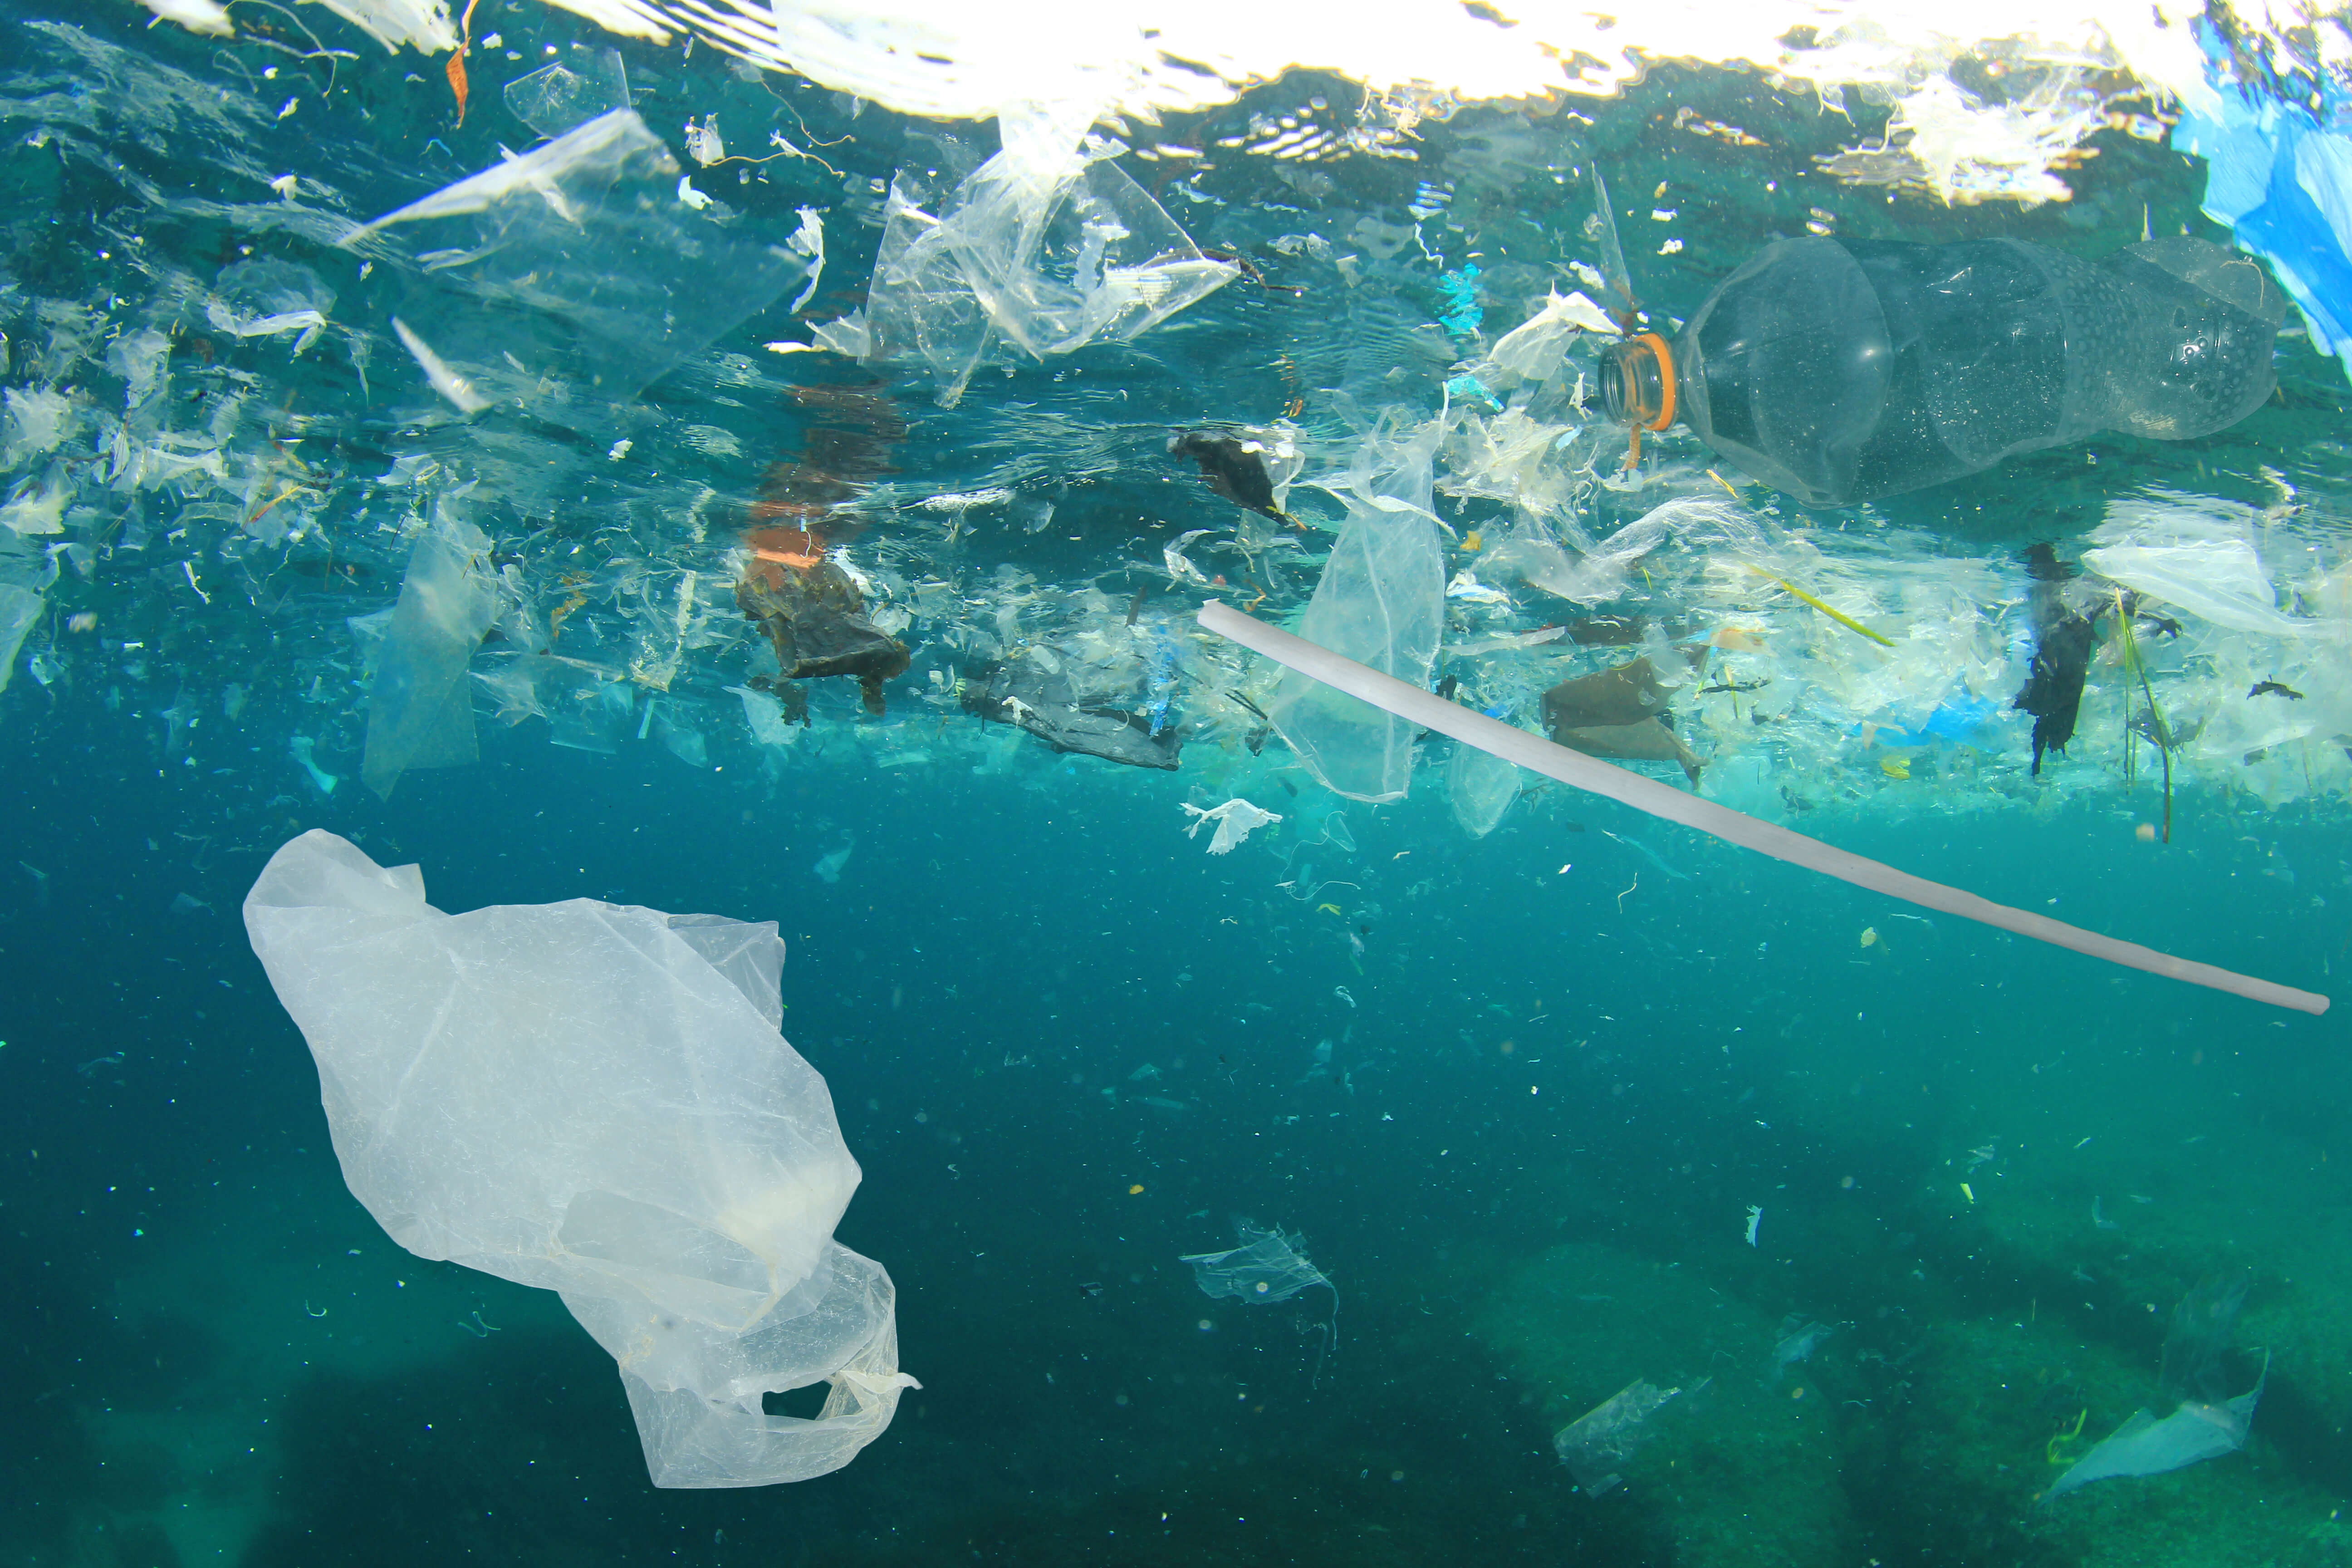 Ocean polluted with rubbish